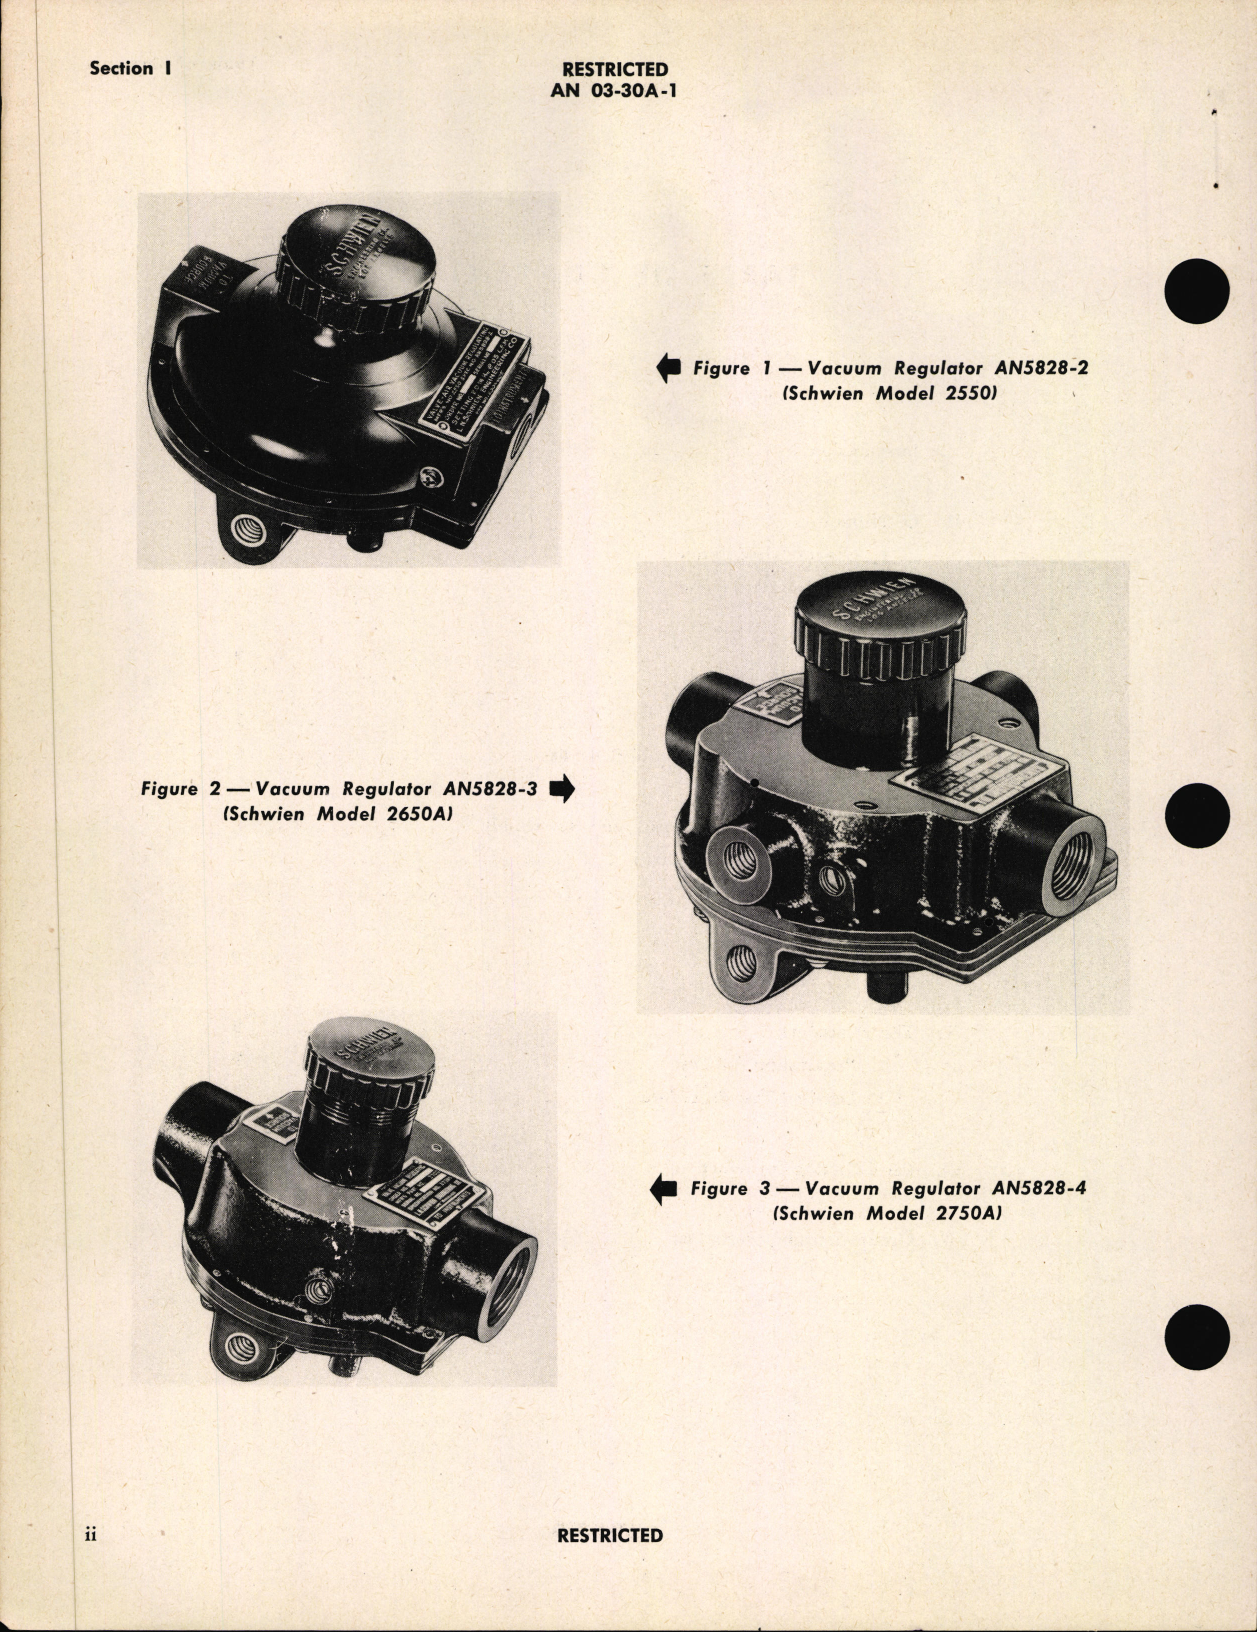 Sample page 4 from AirCorps Library document: Handbook of Instructions with Parts Catalog for Vacuum Regulating Valves